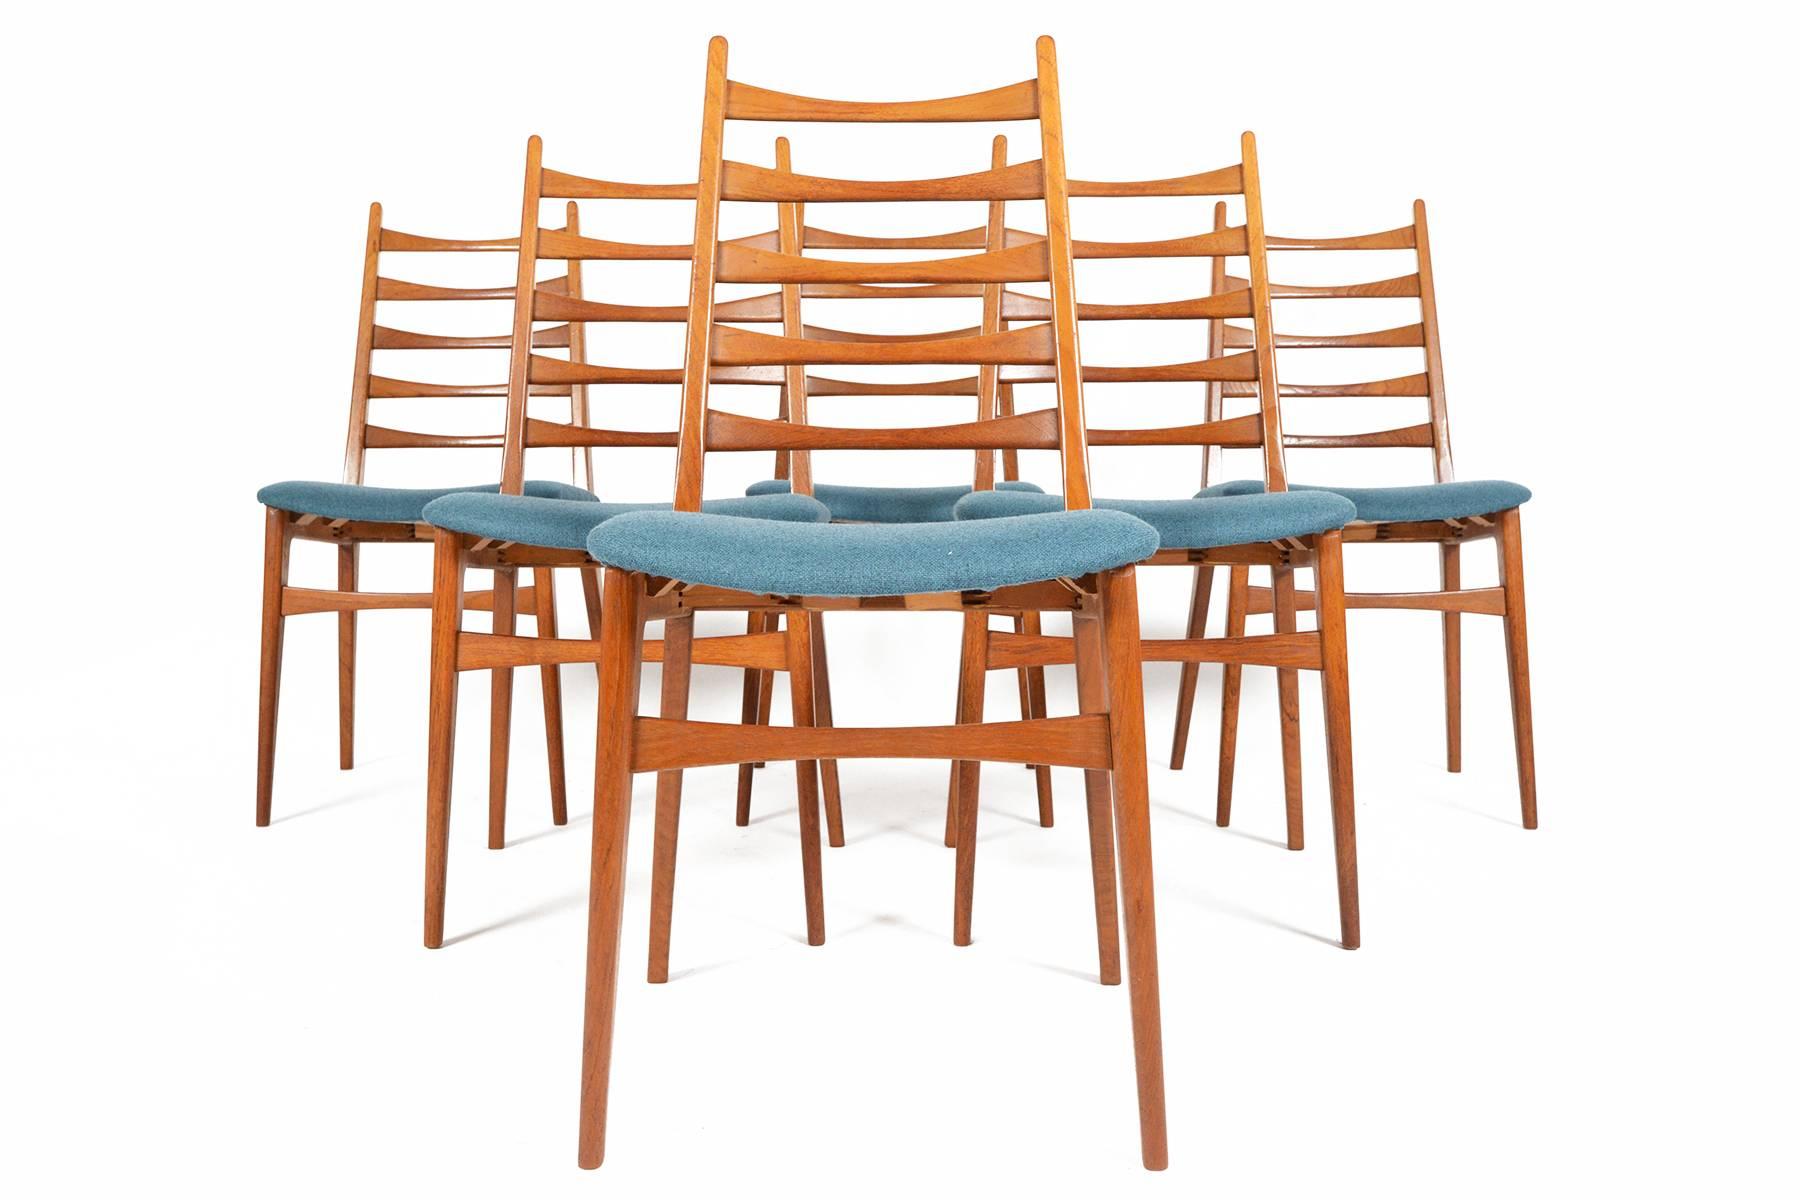 This set of six Danish modern ladder back dining chairs in teak evoke the elegant style of Niels Kofoed. Five atomic bowtie spokes offer support and structure to each frame. Seats have been recently upholstered in cerulean wool from the 